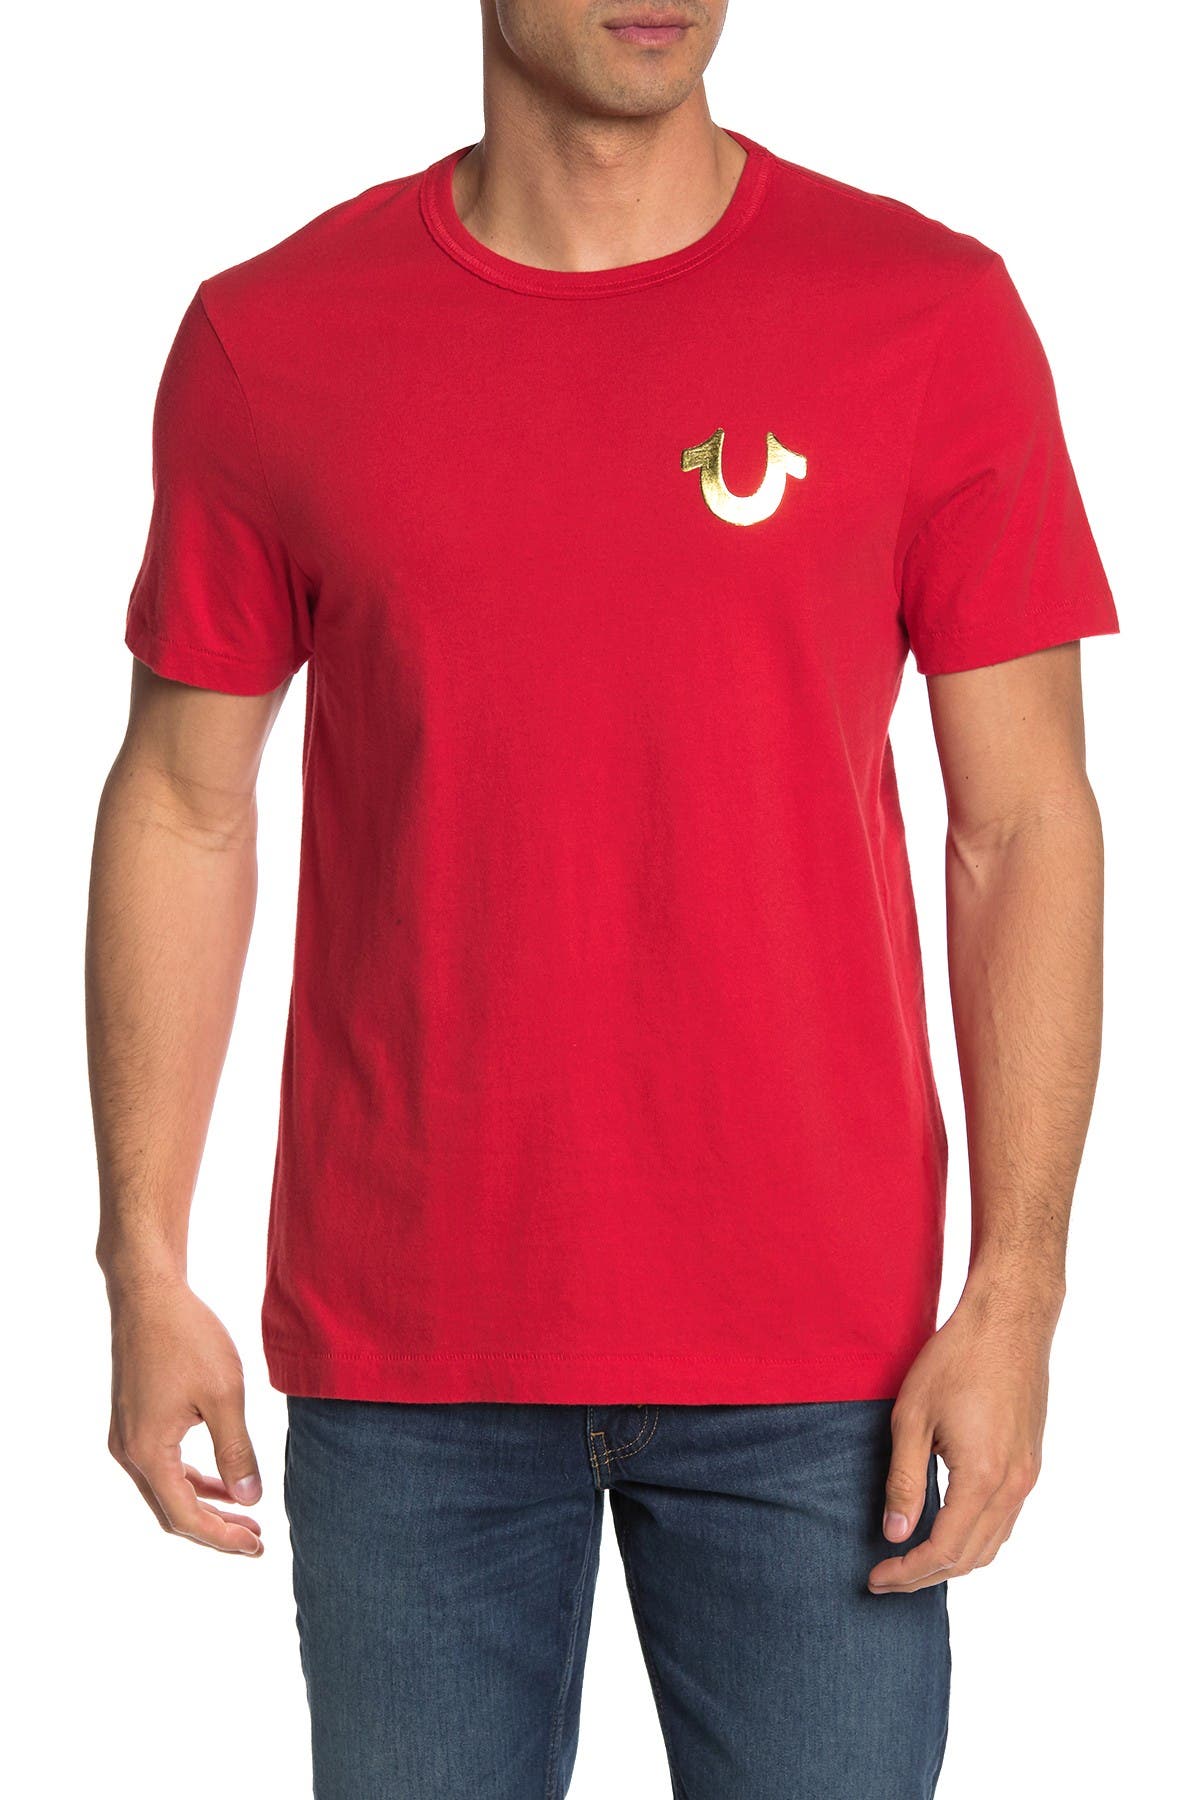 red and gold true religion shirt